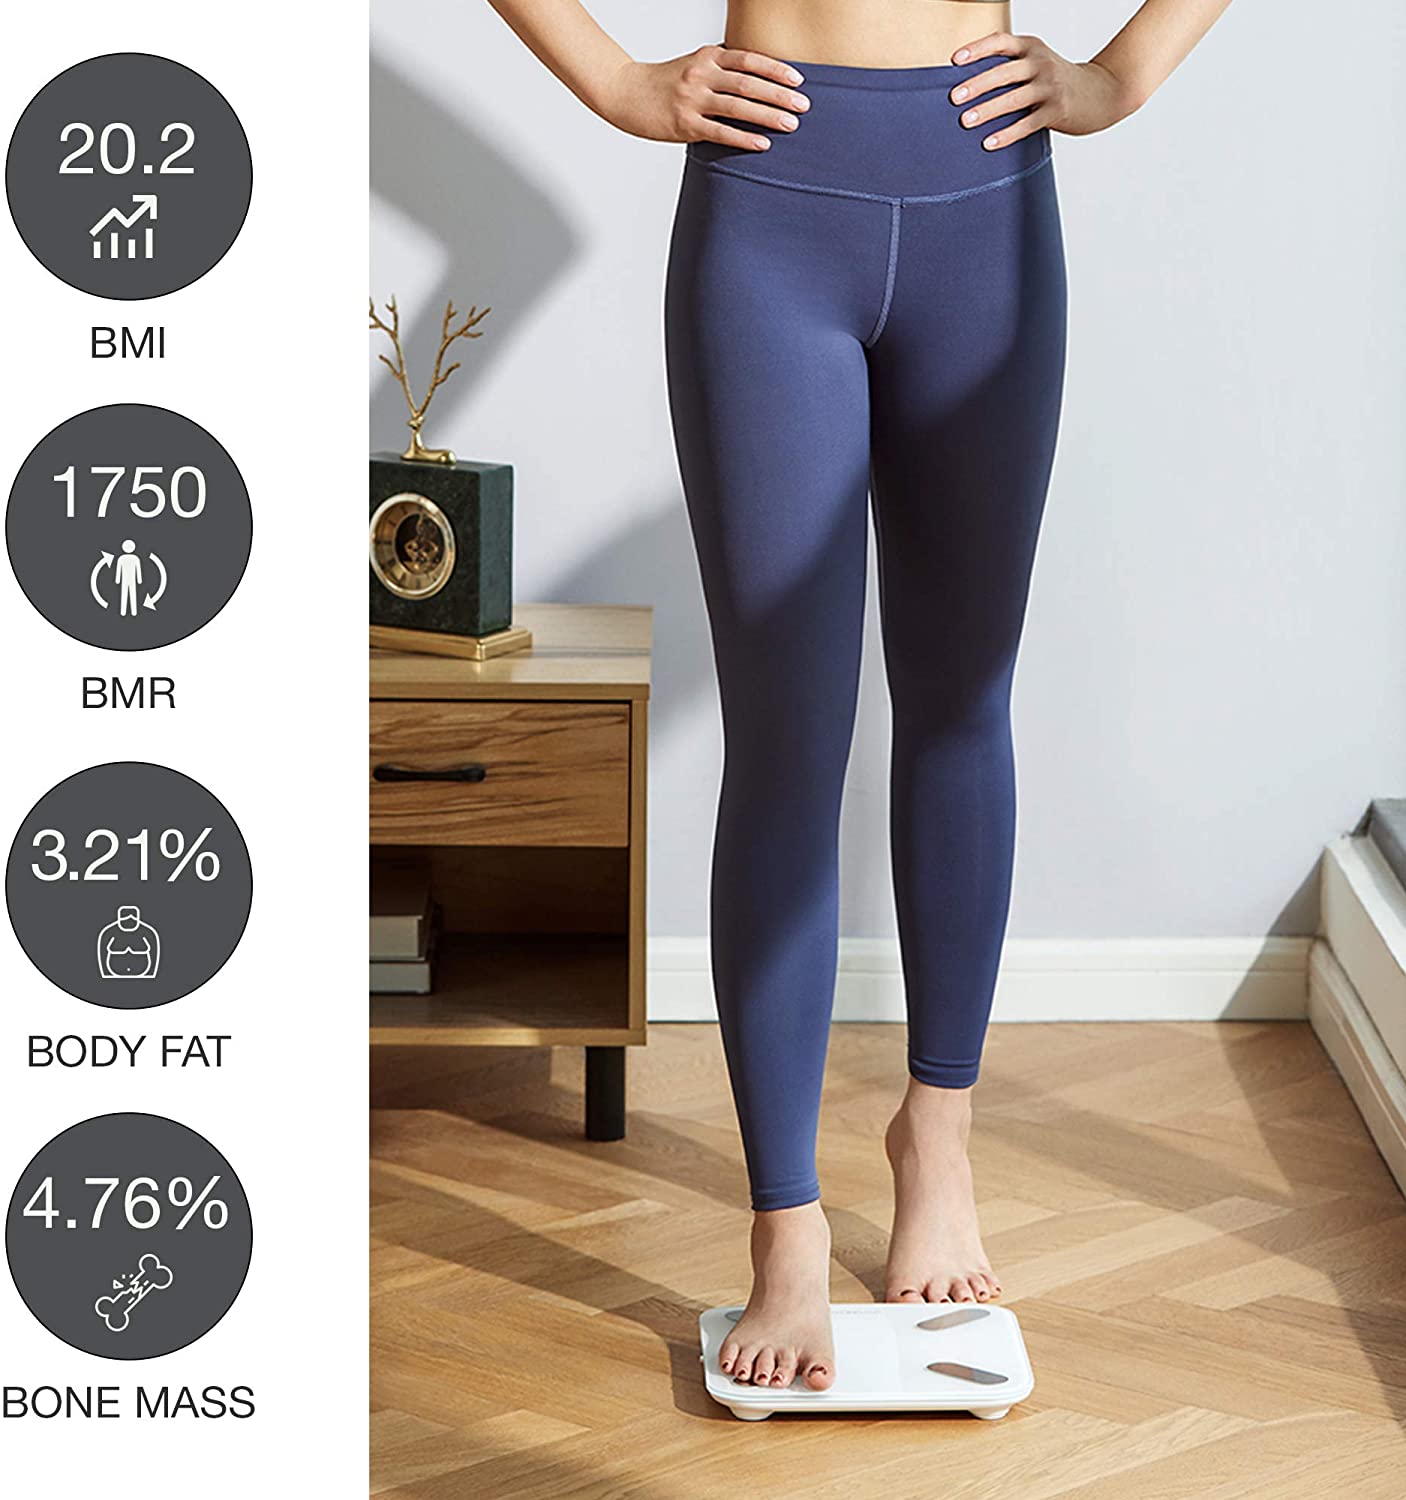 Yunmai X Smart Scale Body Analyzer 2ND GEN for 2020 | Compact Bluetooth Body Fat and BMI Scale Plus More. Rechargeable with Free App and Hidden Display